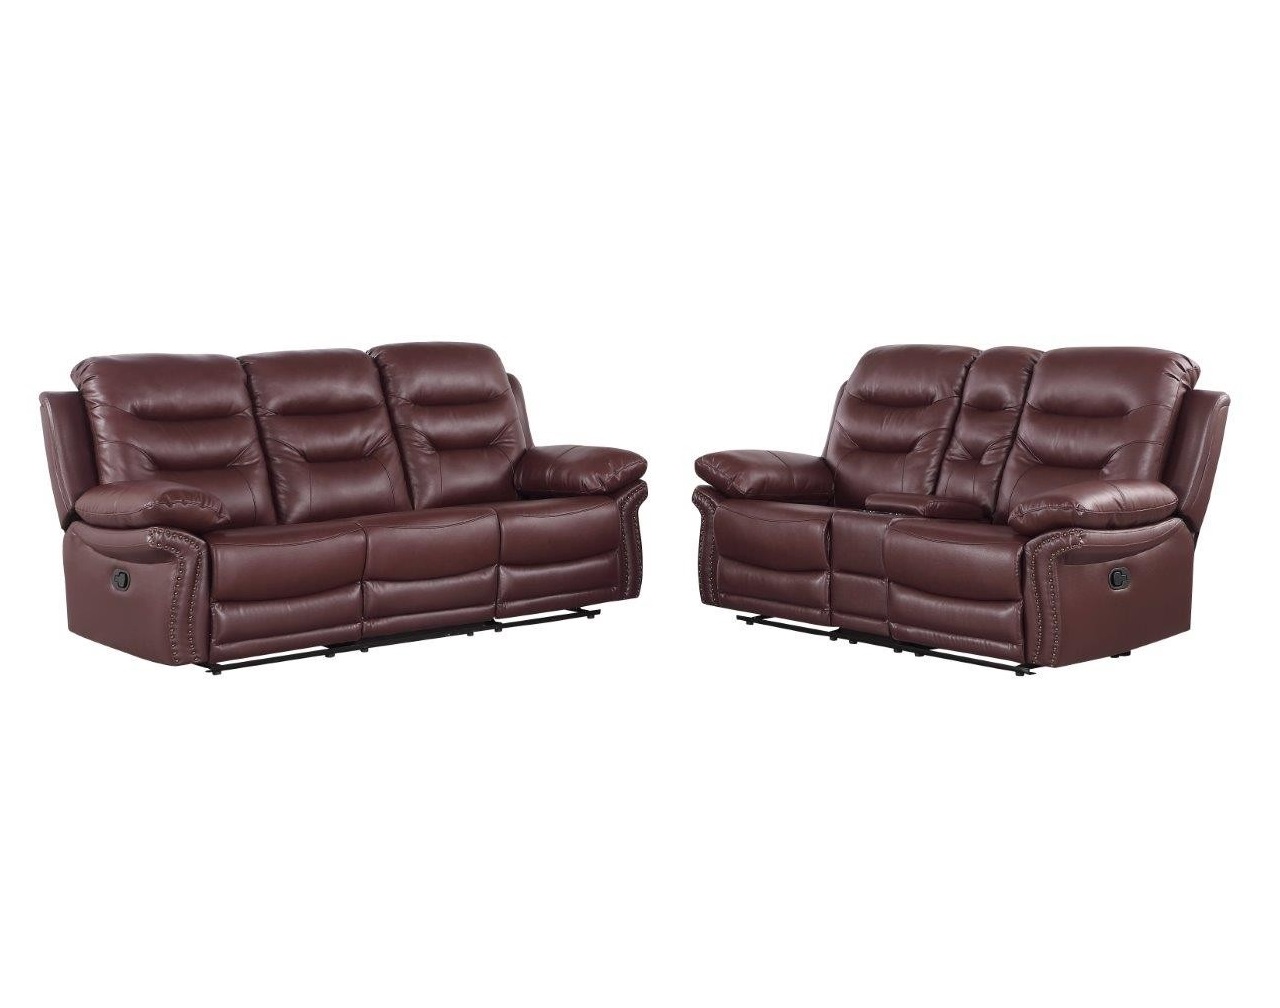 Two Piece Indoor Burgundy Faux Leather Five Person Seating Set-343902-1